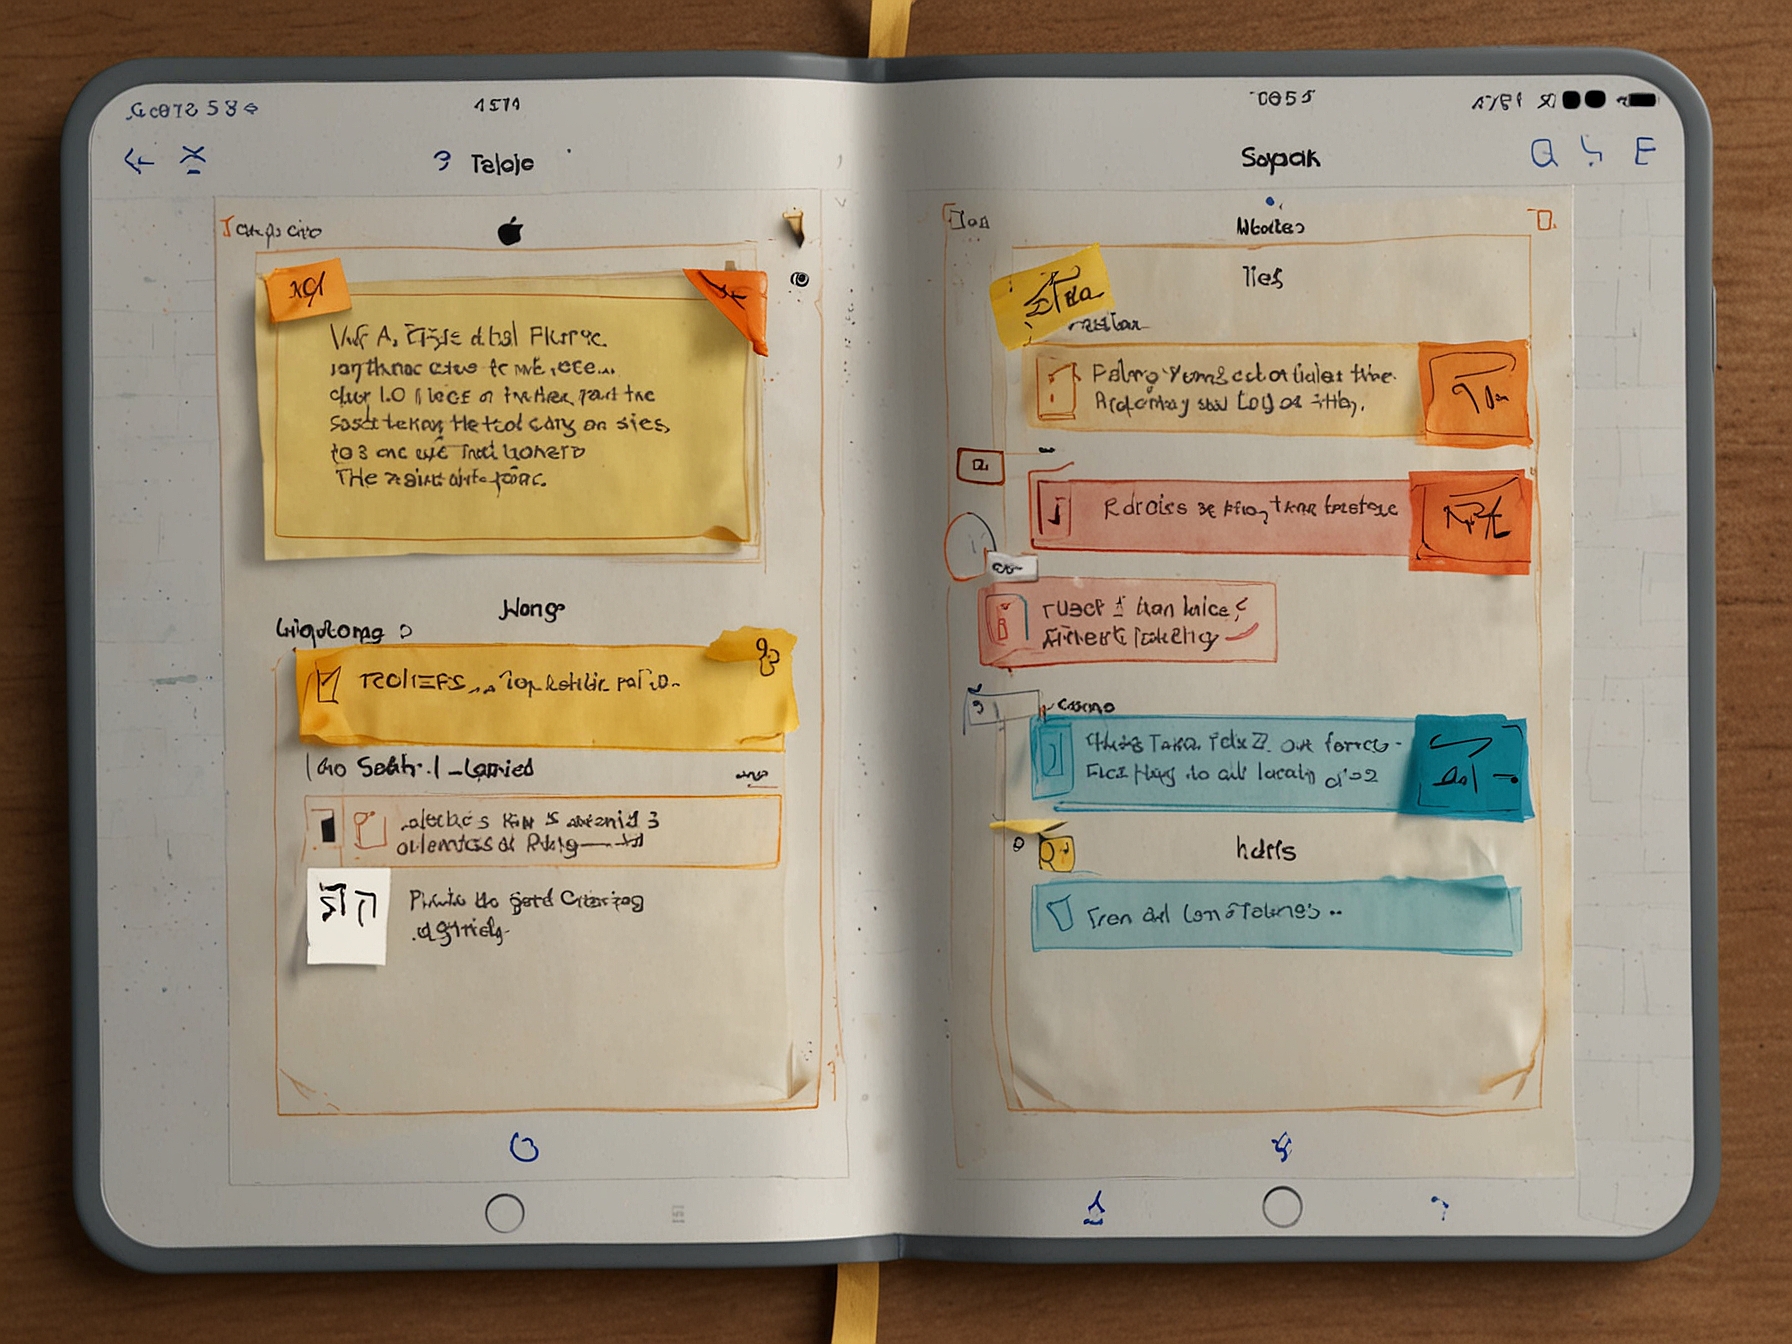 A visual demonstrating the advanced tagging and categorization feature in iOS 18 Notes, highlighting the smart folders and custom tags that aid in efficient organization.